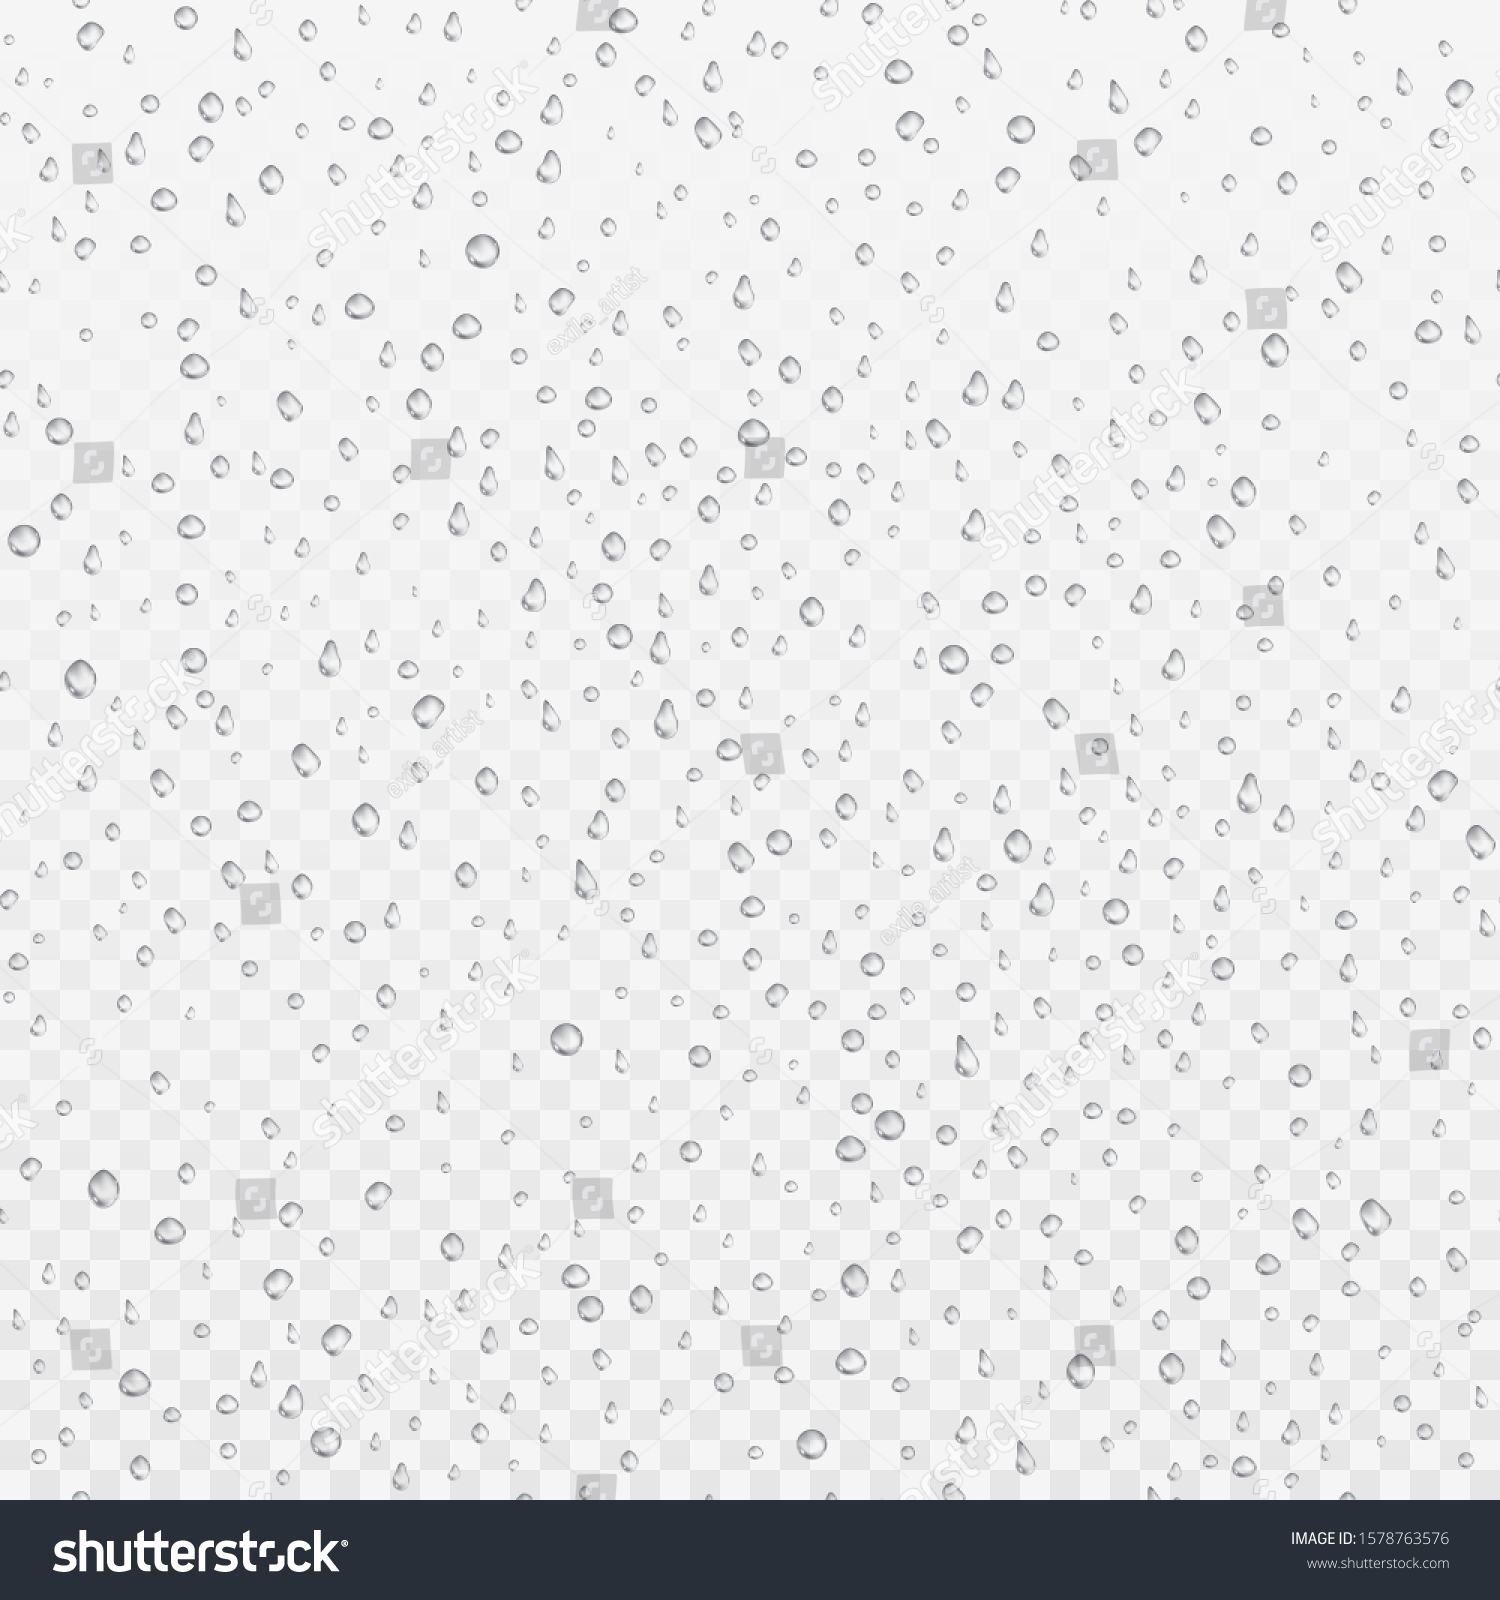 Seamless texture of Drops. Liquid clear droplet. Dew on glass surface. Realistic aqua pattern. vector illustration  #1578763576